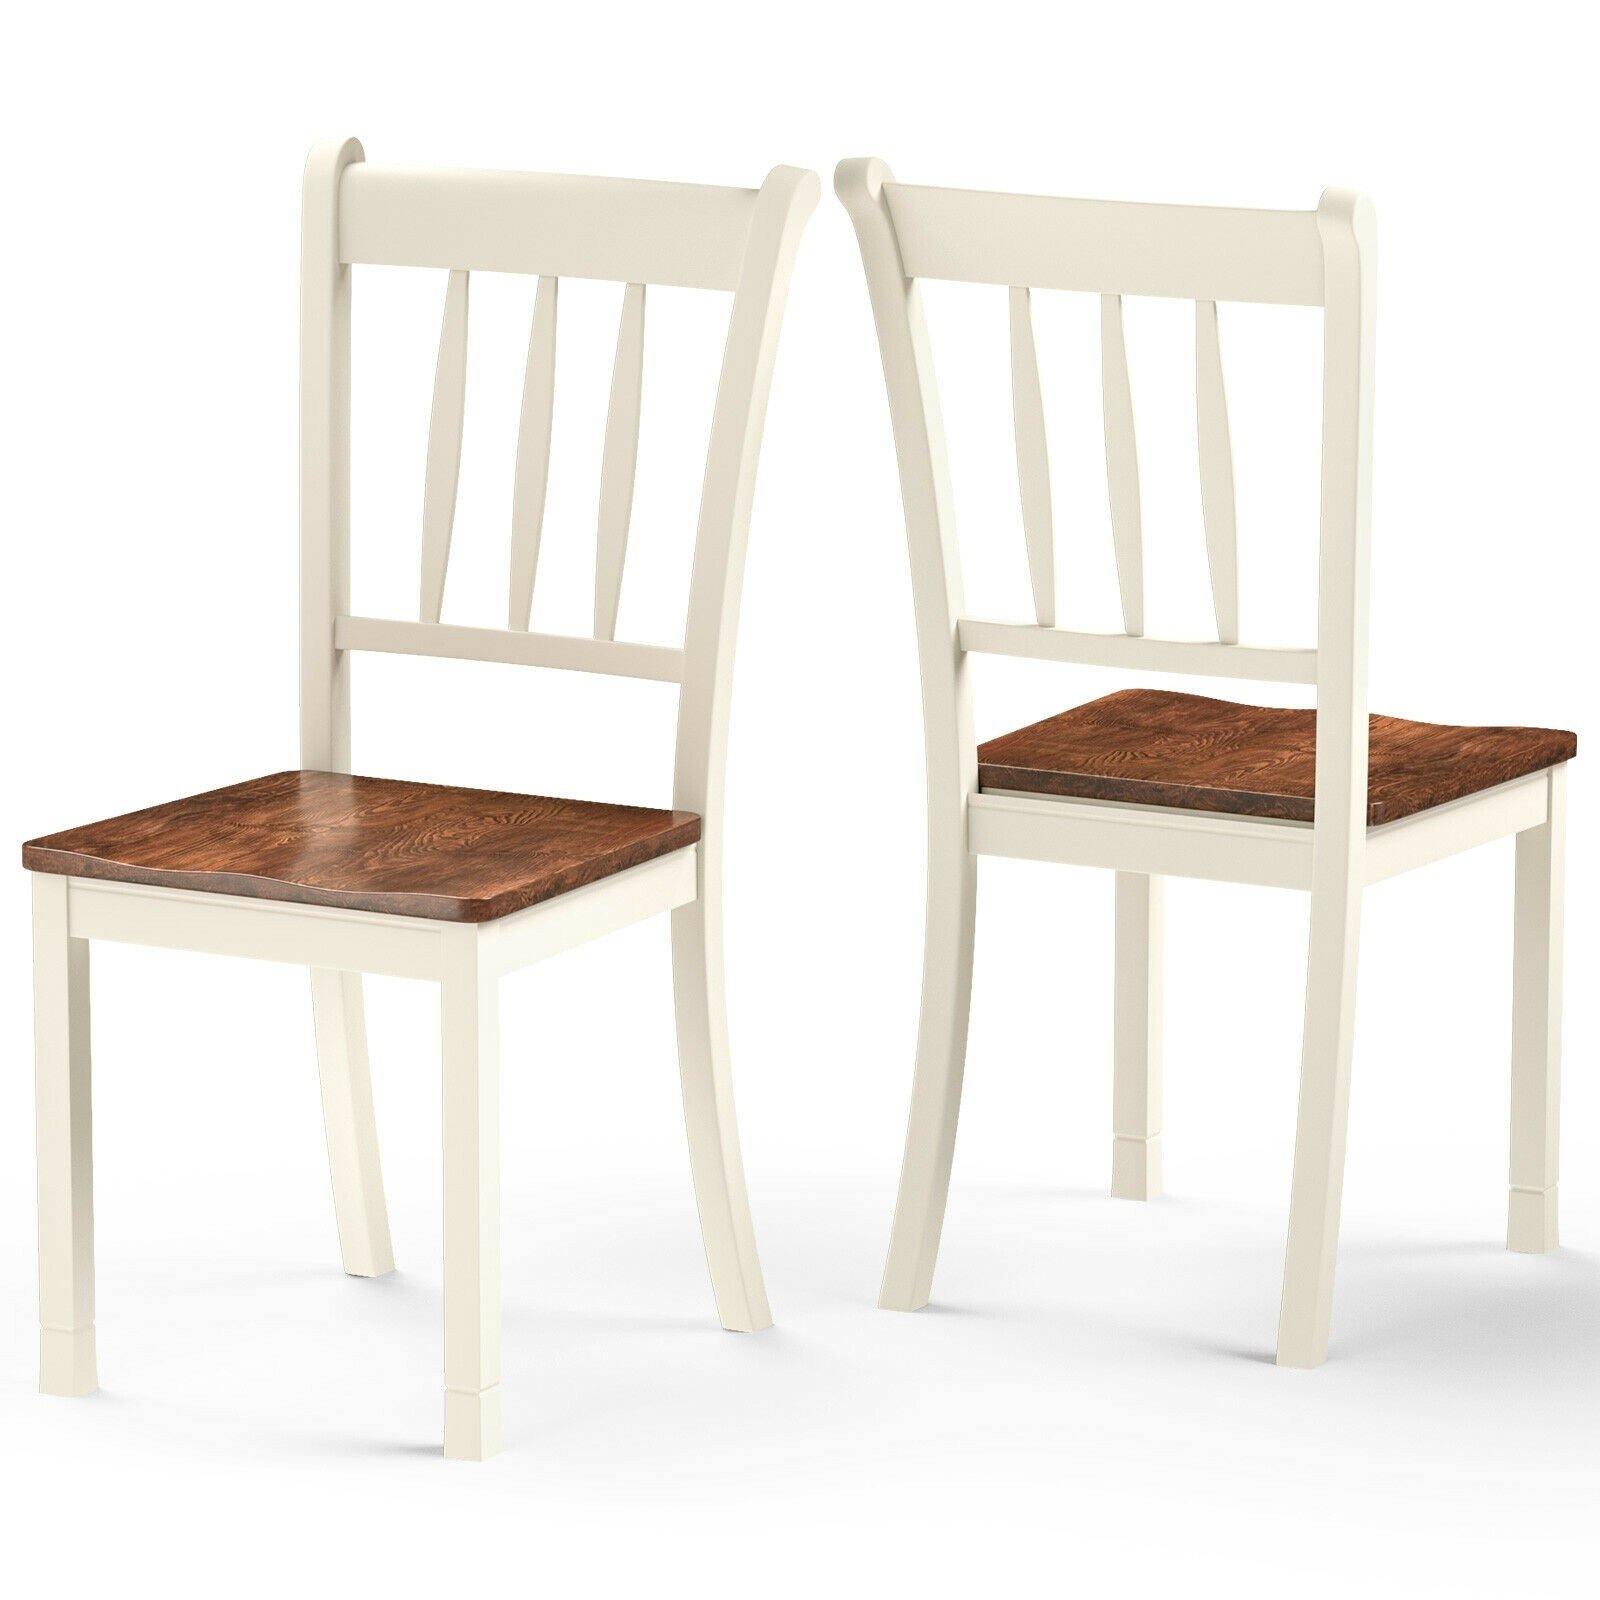 Solid Wood Whitesburg Dining Chairs Set of 4